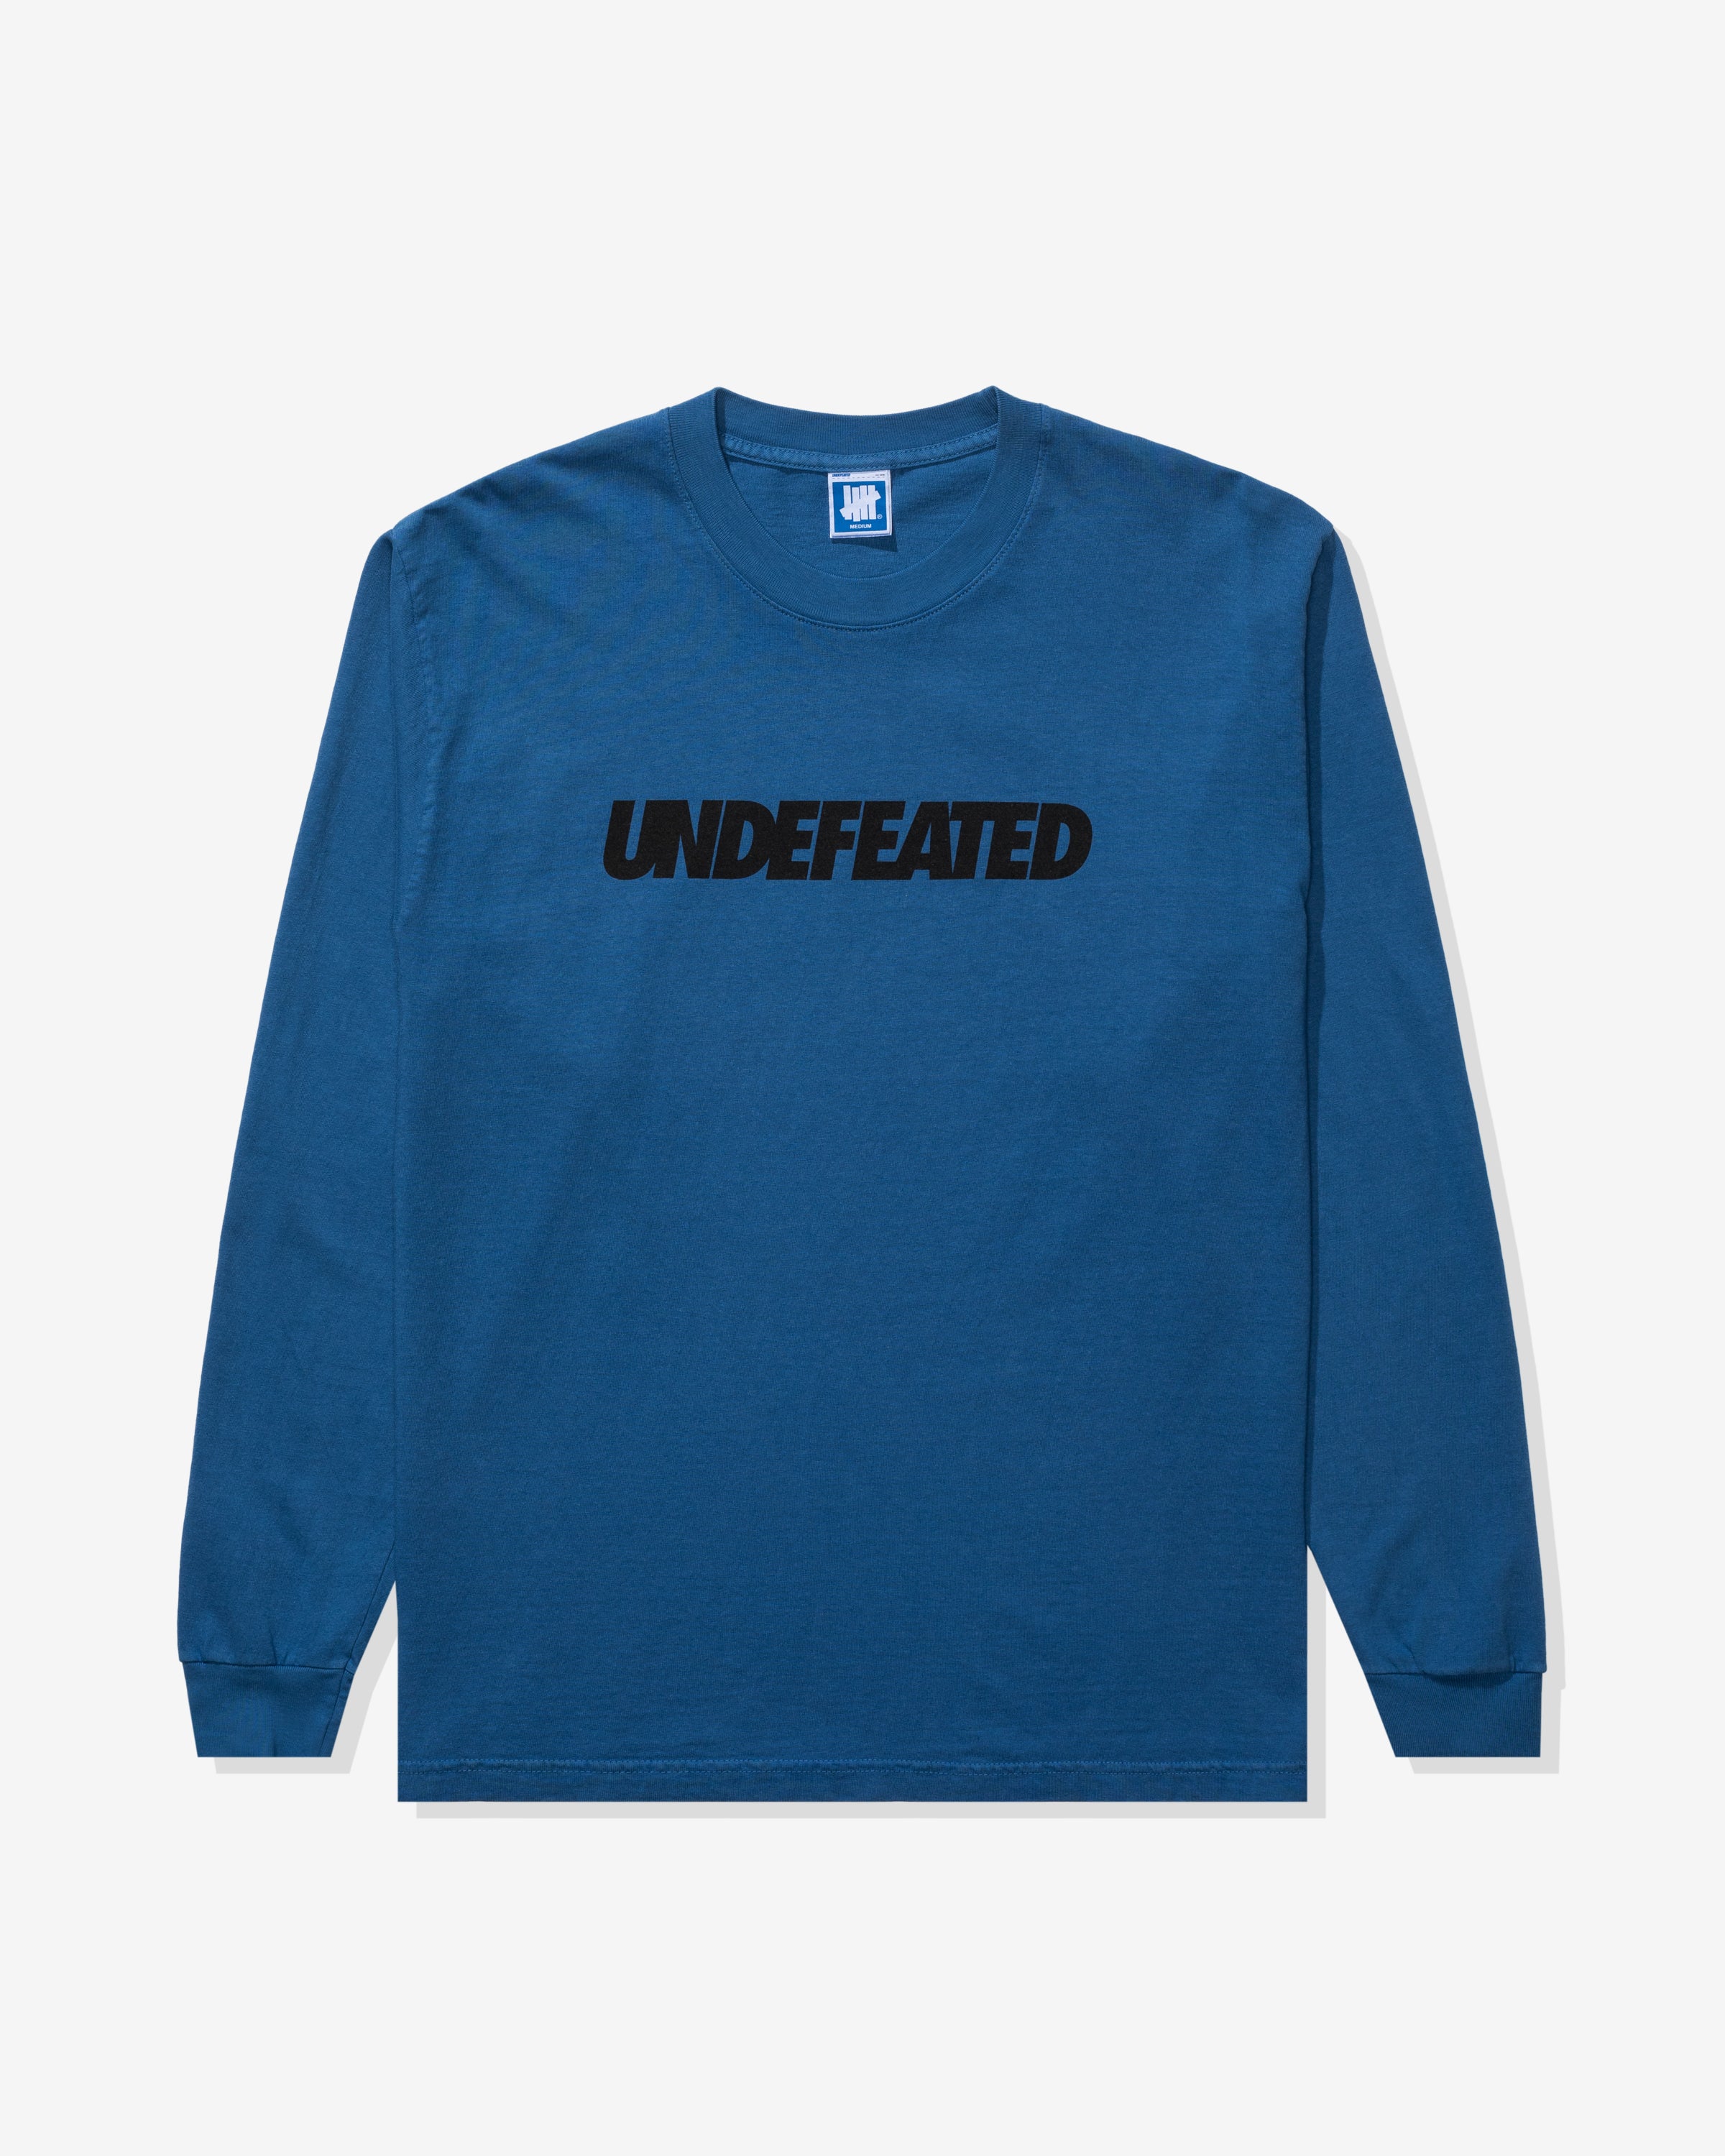 UNDEFEATED LOGO L/S TEE – UNDEFEATED JAPAN